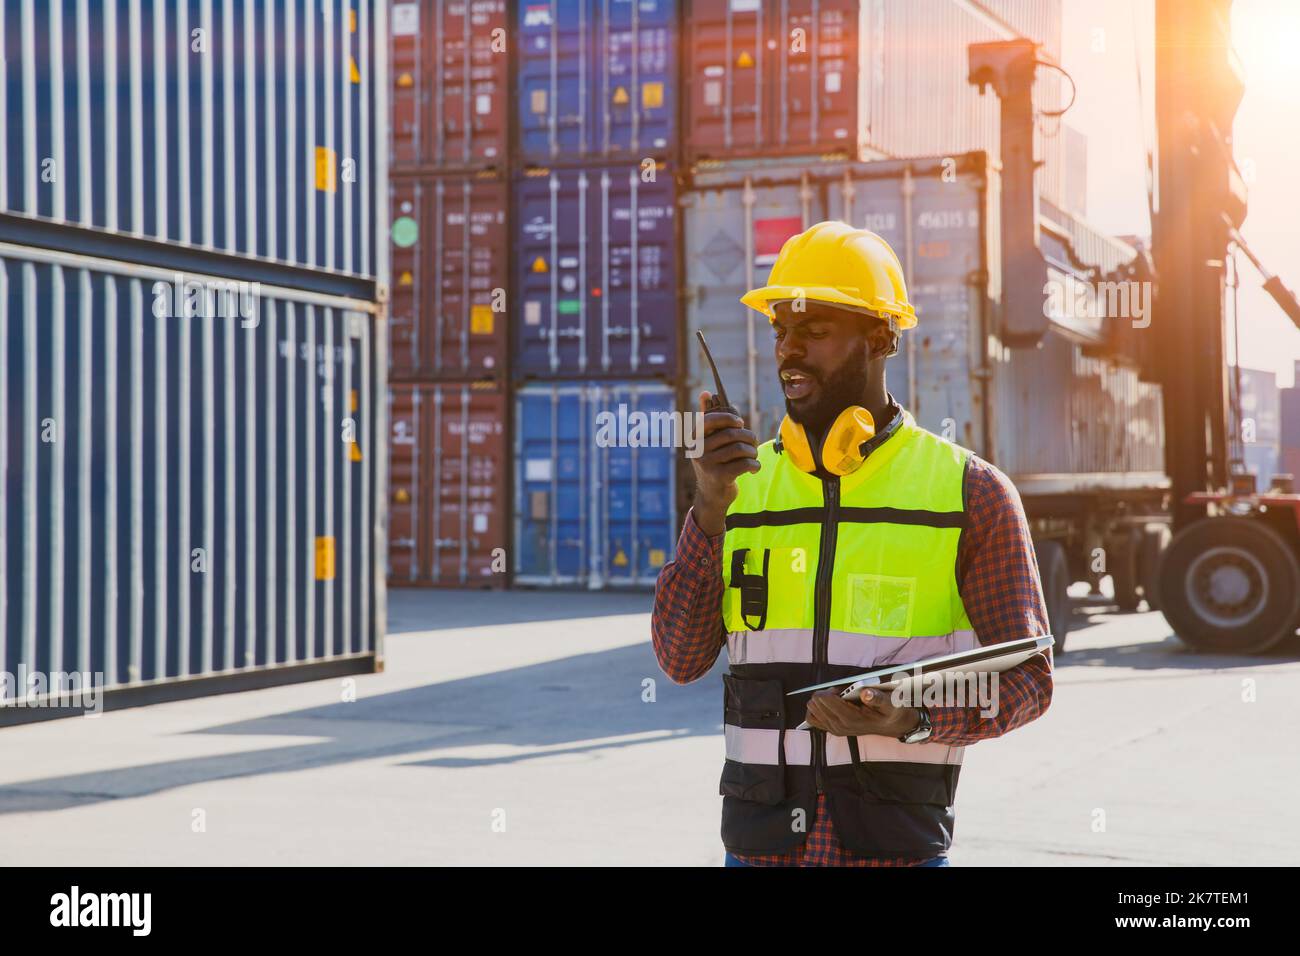 customs shipping staff worker working at cargo port container ship yard with radio control Stock Photo